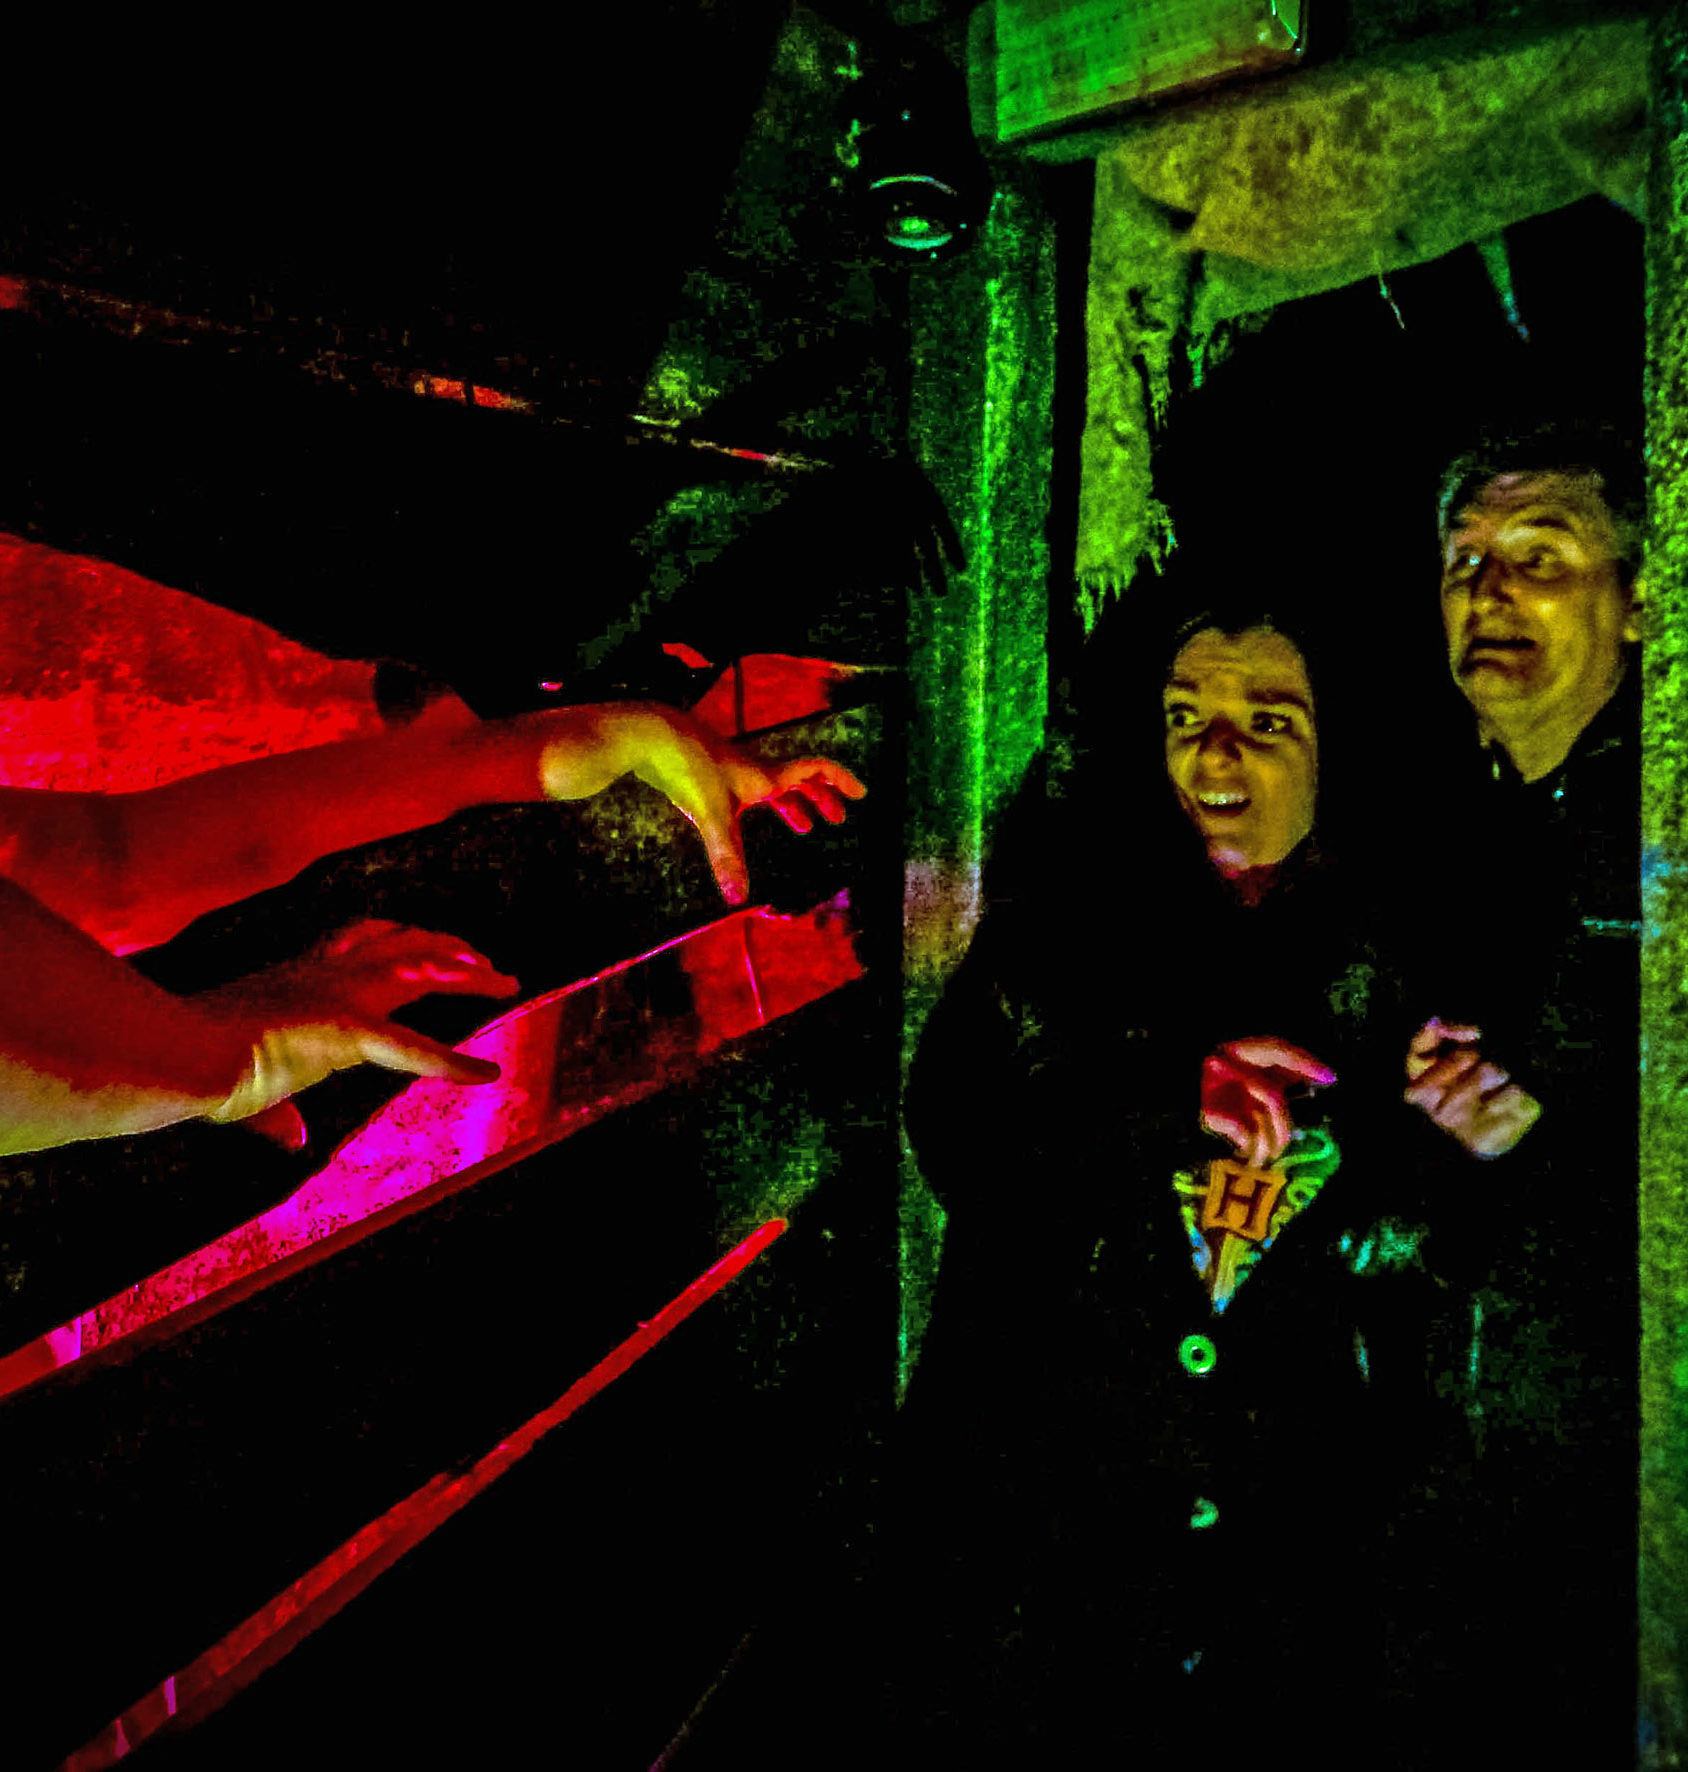 Terror Mountain has “terrifying fun” in store for visitors